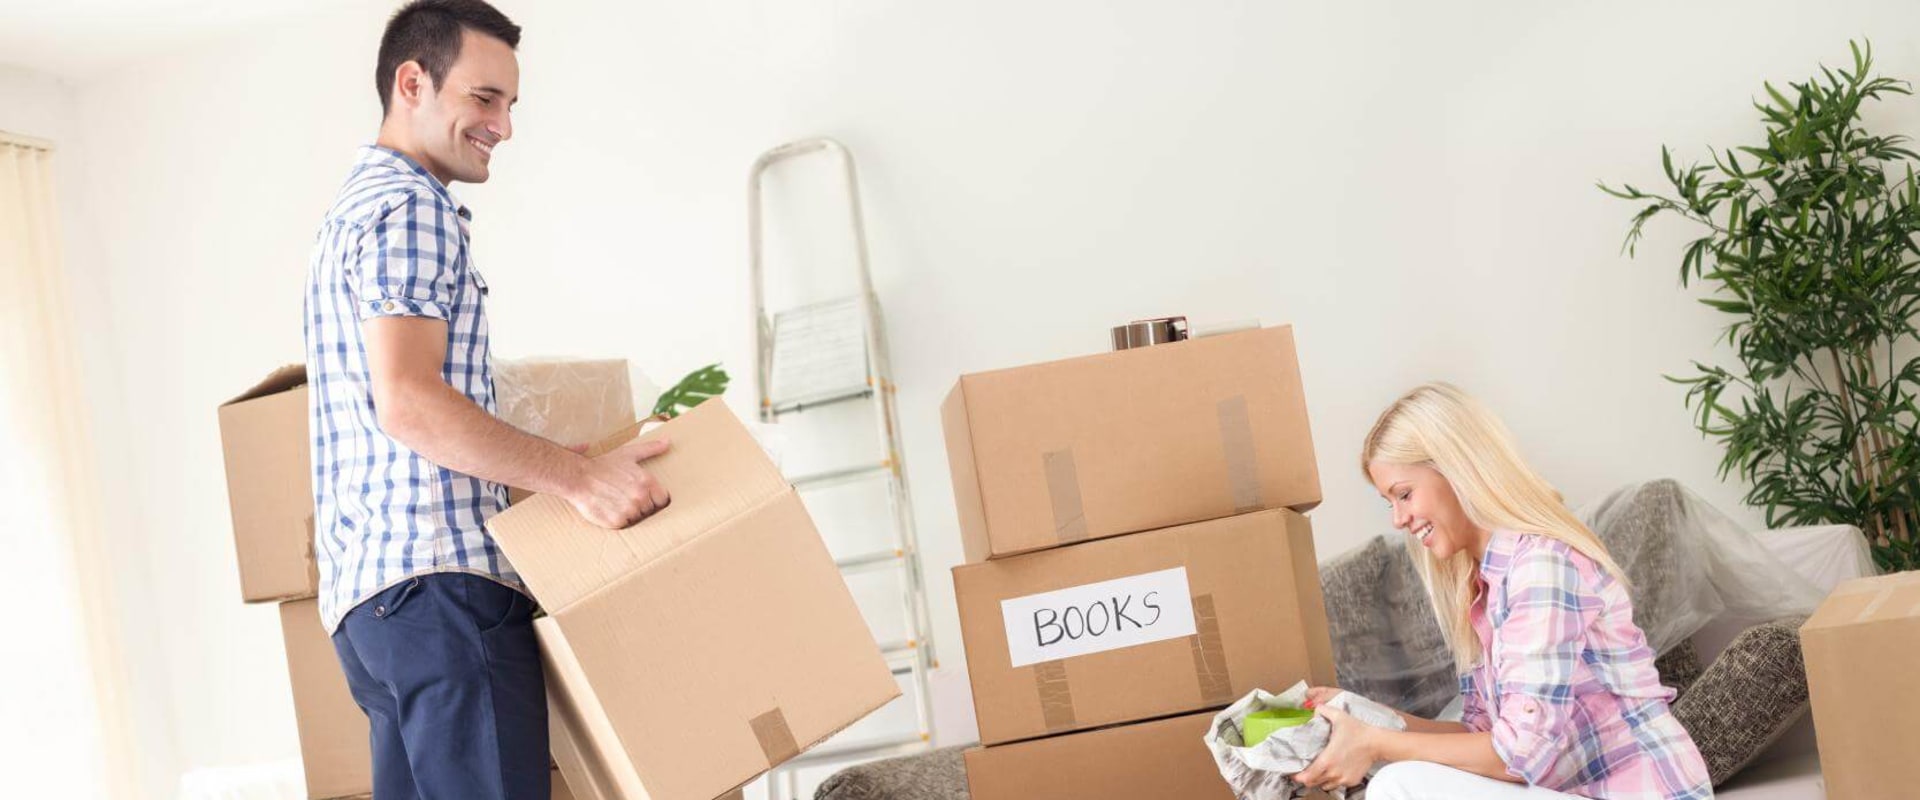 Long Distance Movers in Las Vegas